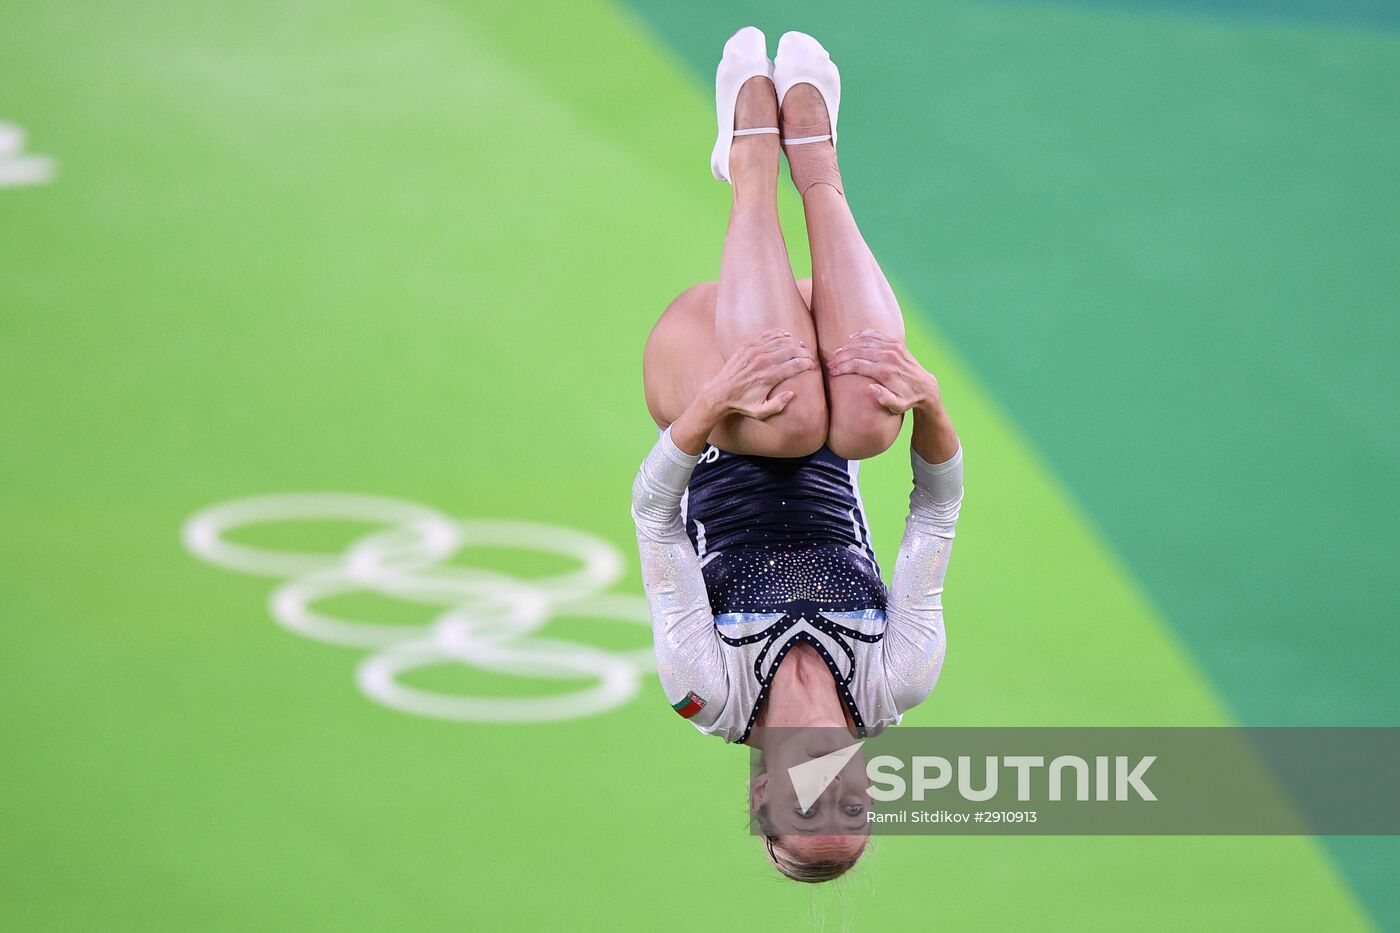 2016 Olympics. Women's trampoline competitions